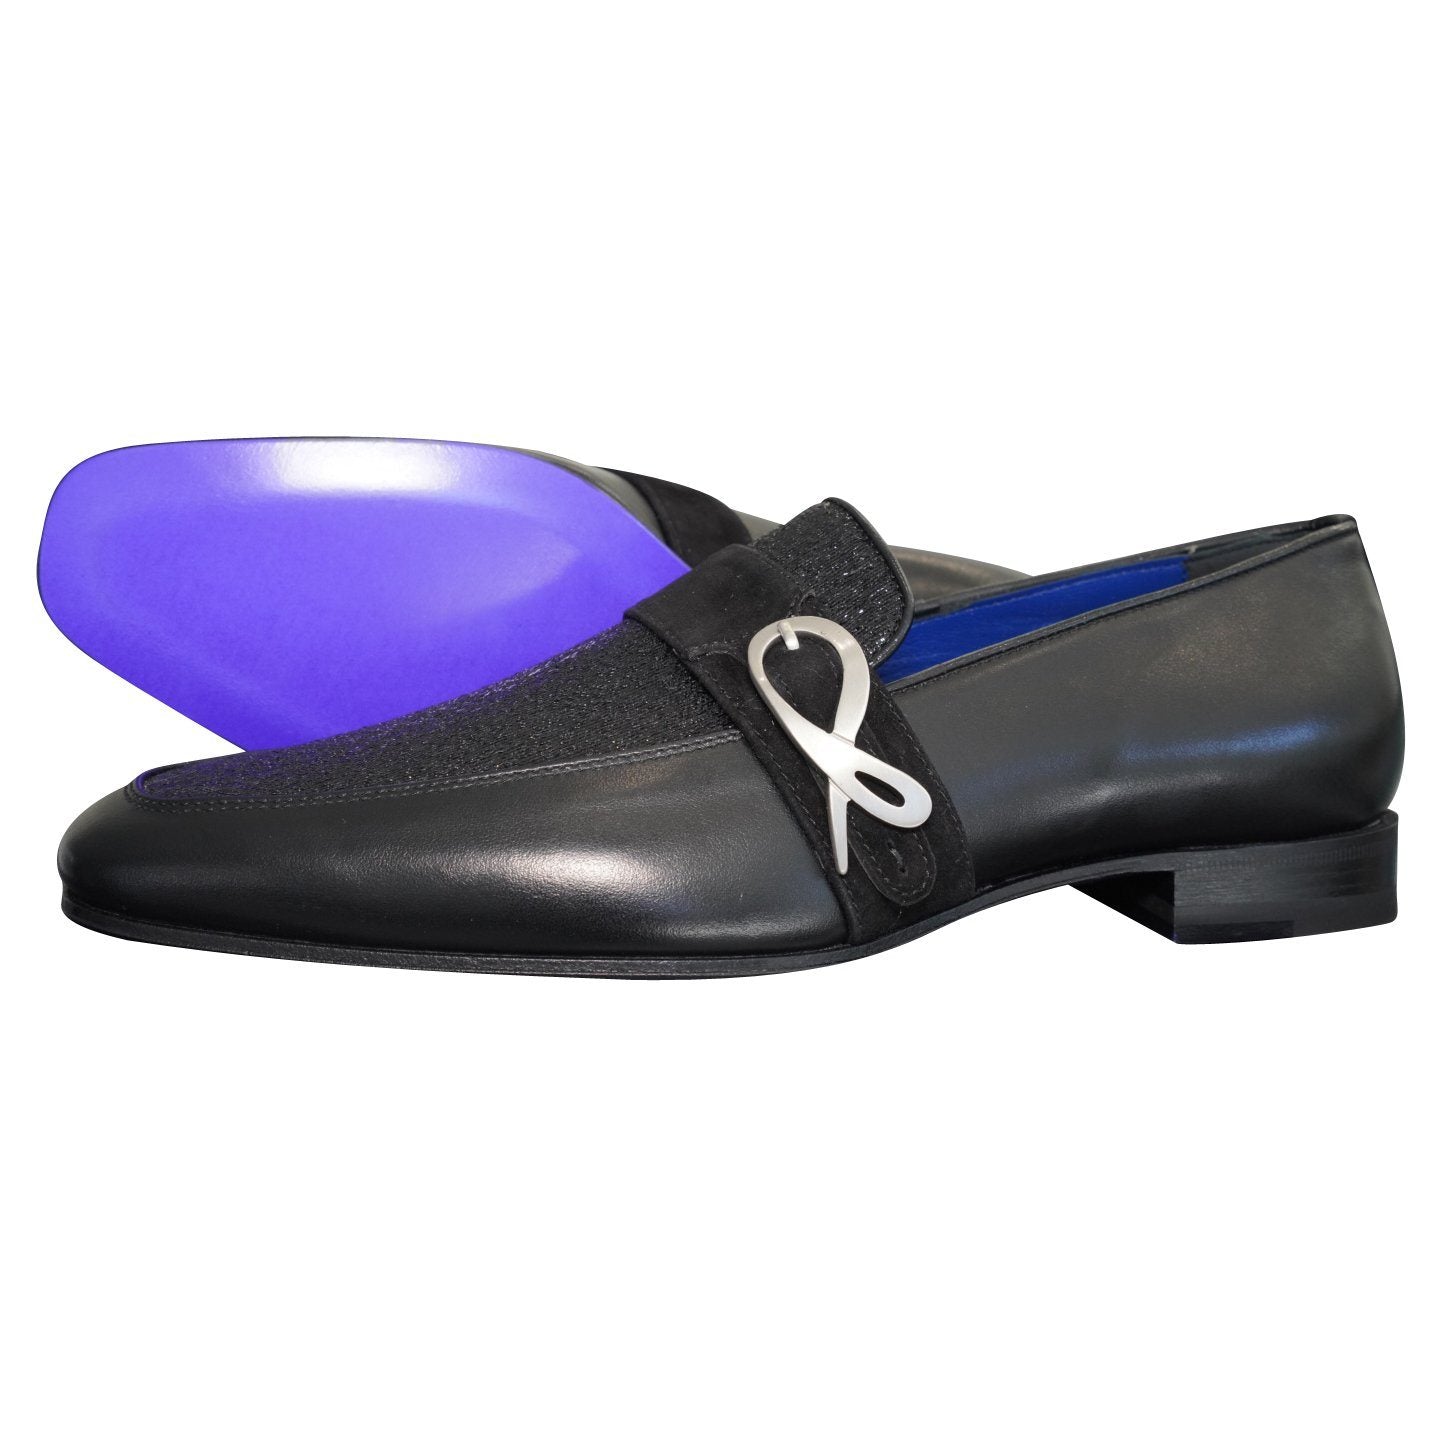 Black Diamante Leather Monk Silver Loafer